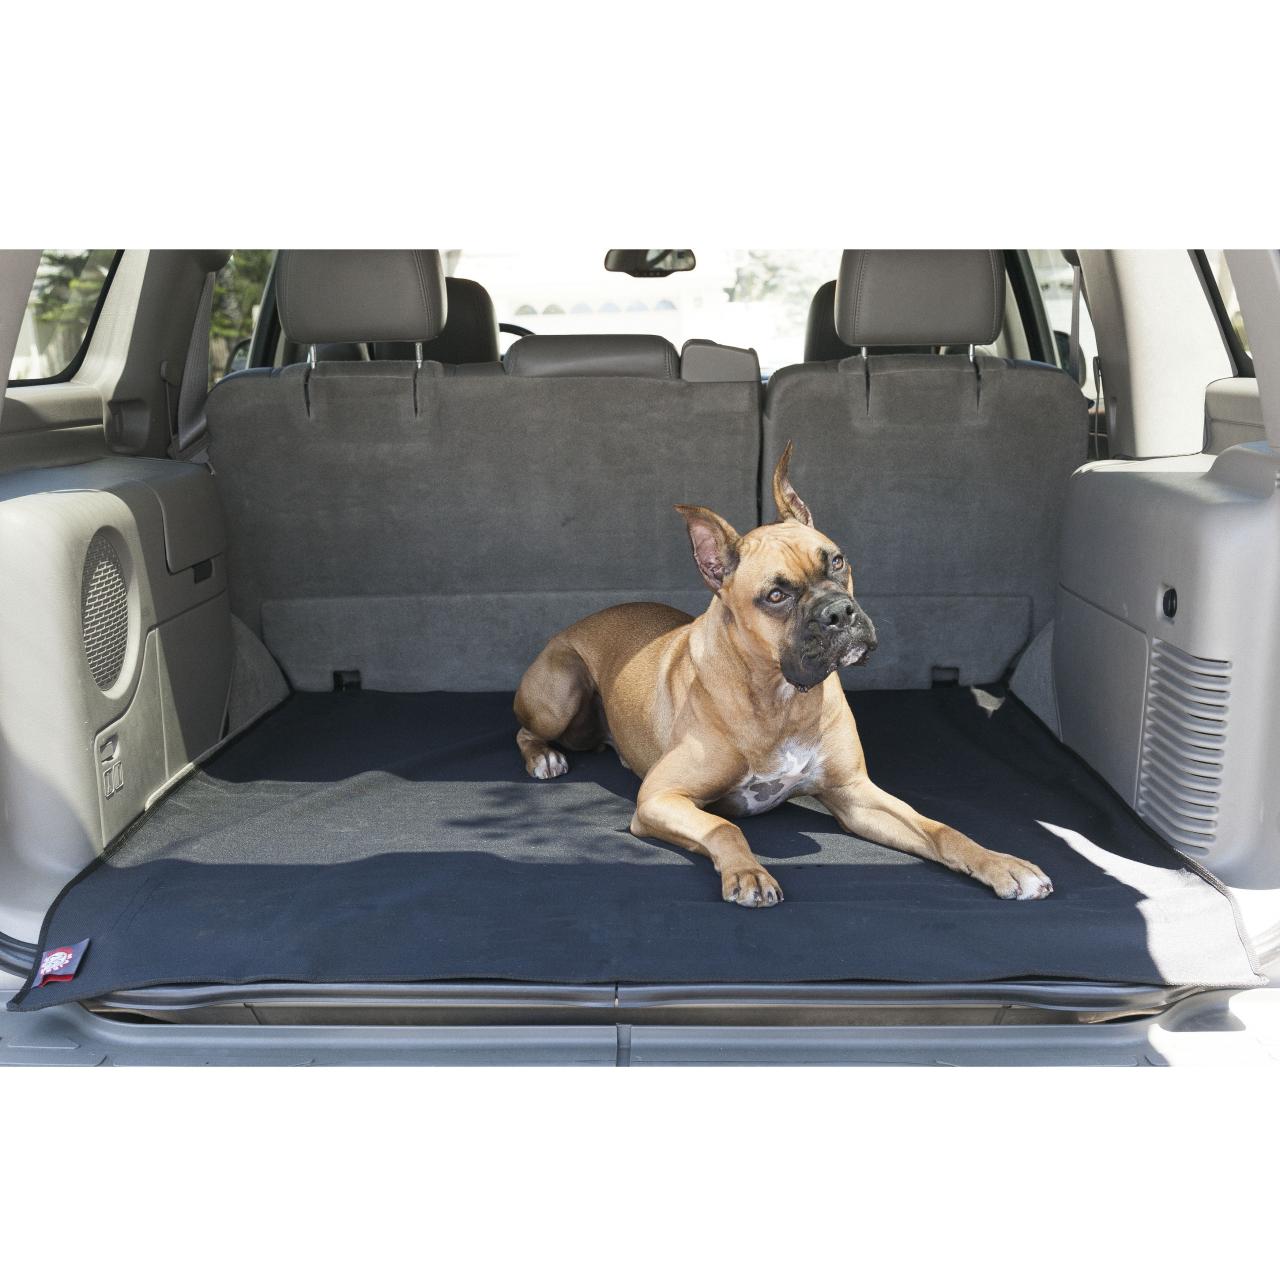 Canine Covers Cargo Liners for Pets | Best Padded Dog Cargo Liners for Sale  | Water & Stain Resistant Cargo Liner | California Car Cover Company